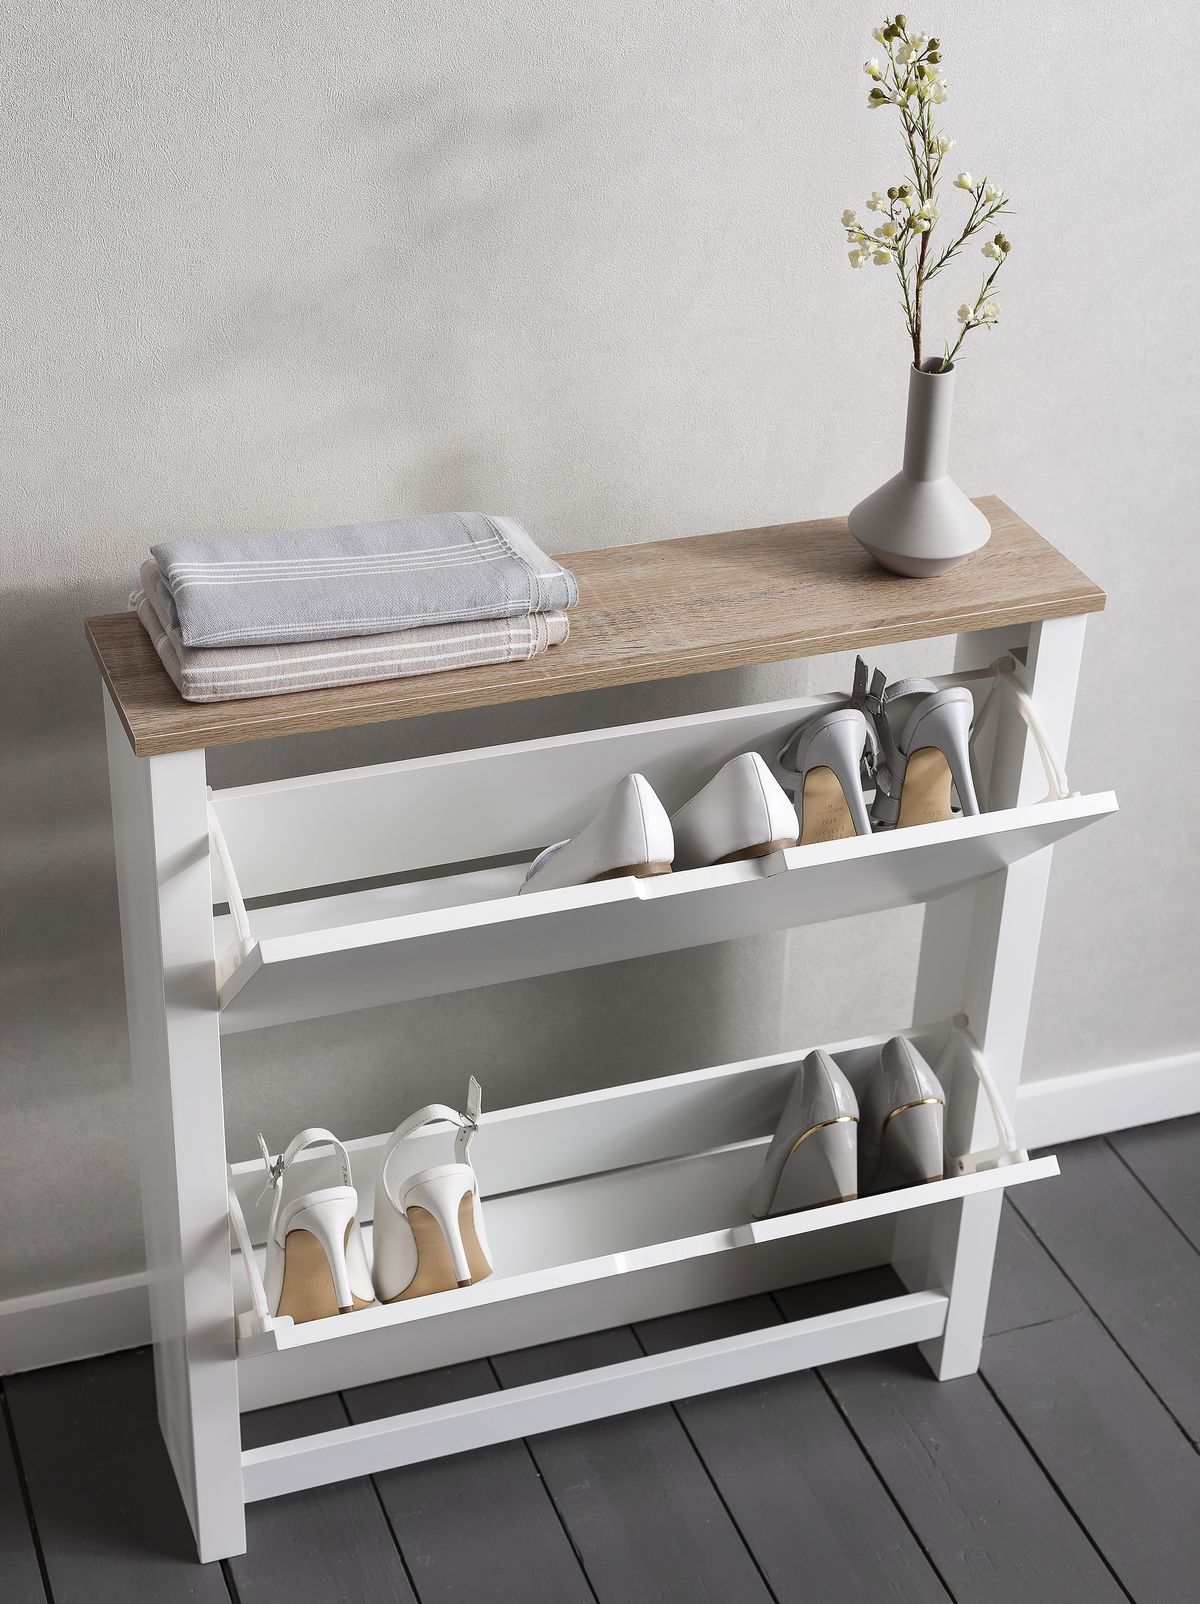 Shoe storage | Shoe racks and cabinets for your home | JYSK Ireland